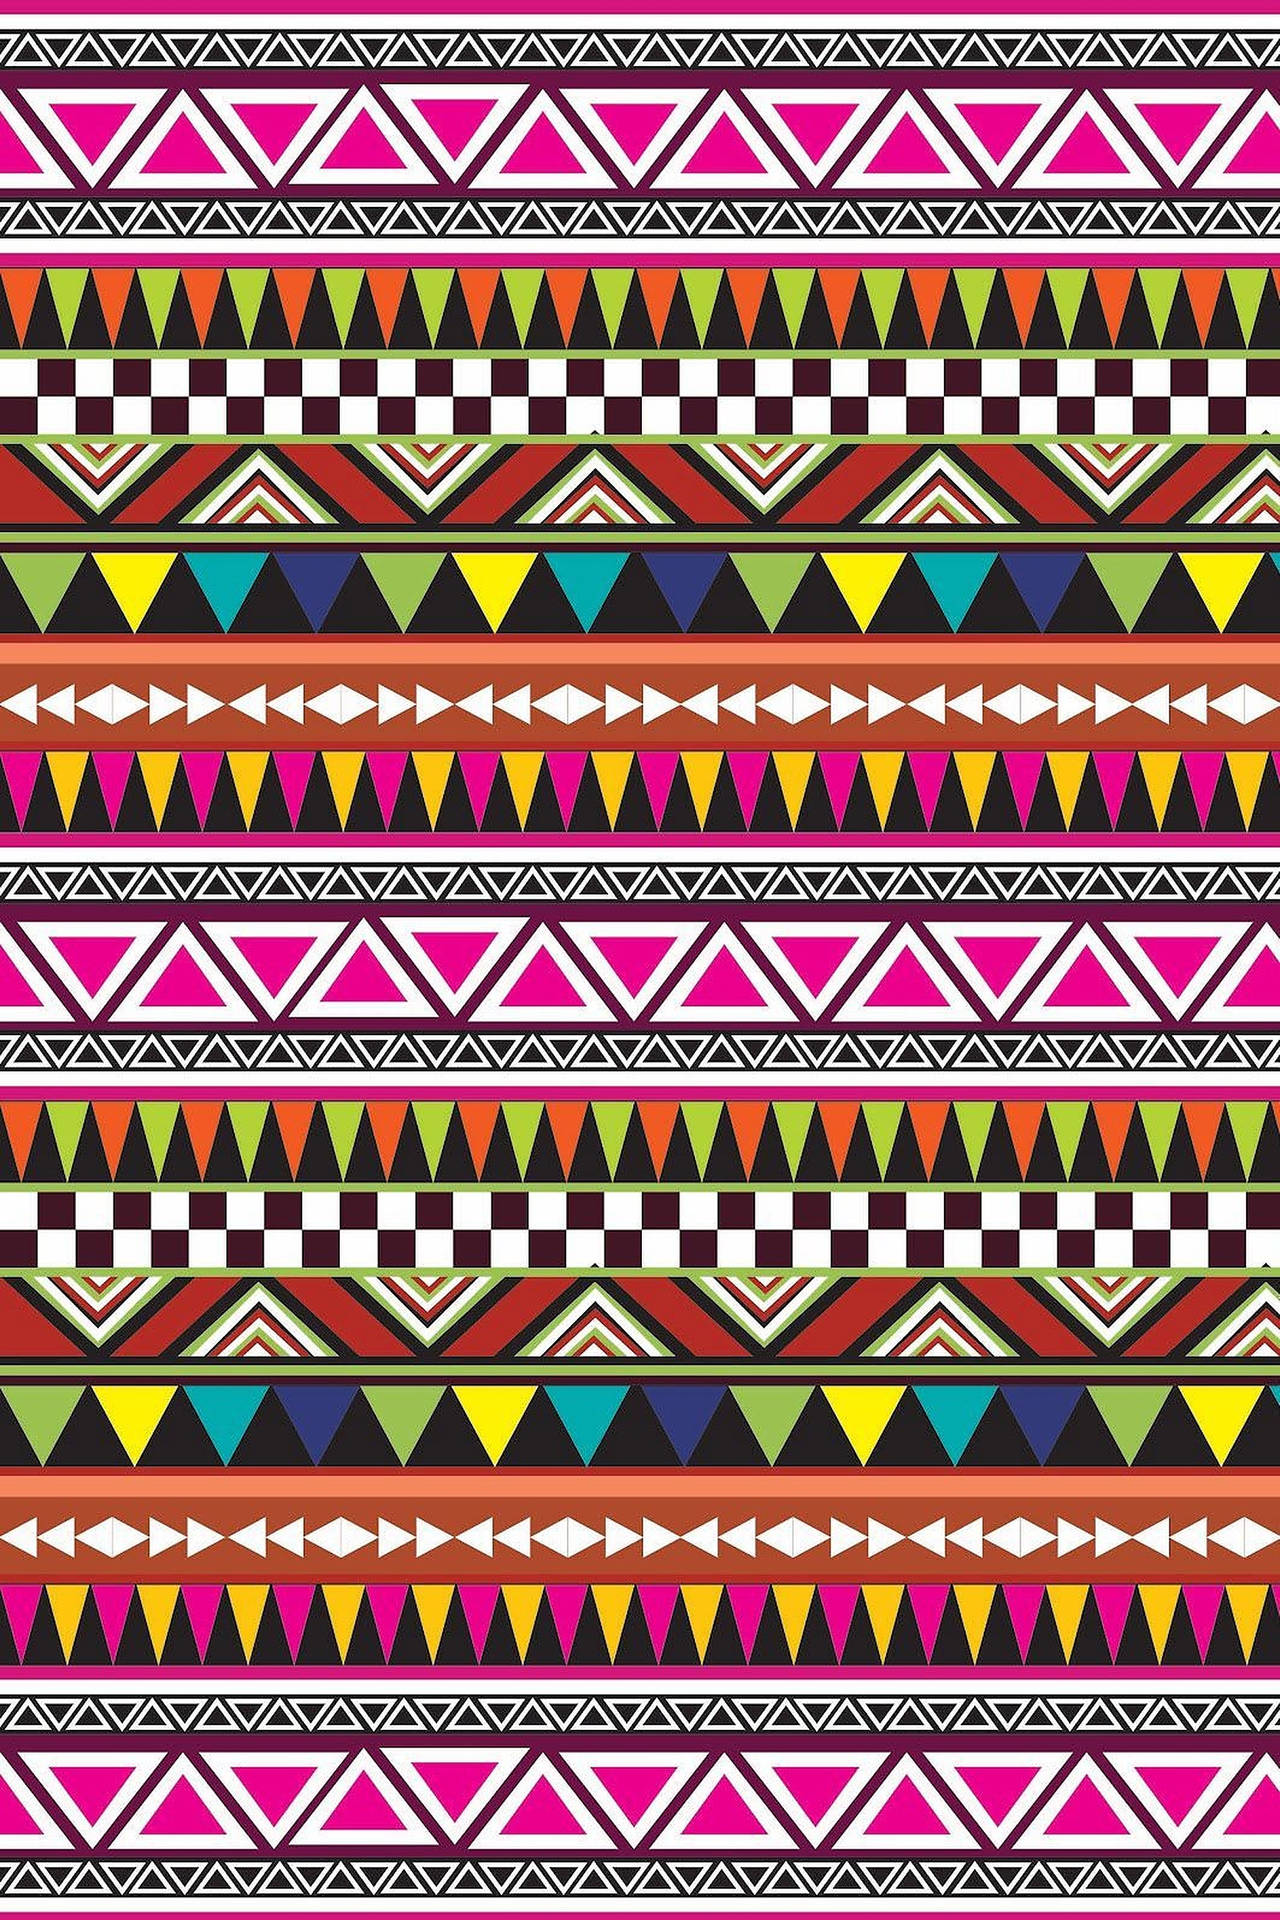 Abstract Seamless Pattern In Boho Style Vector Wallpaper With Ethnic Aztec  Ornament Aztec Pattern Folk Print Template For Fabric Paper Post Cards  Wrapping Tshirts Etc Royalty Free SVG Cliparts Vectors And Stock